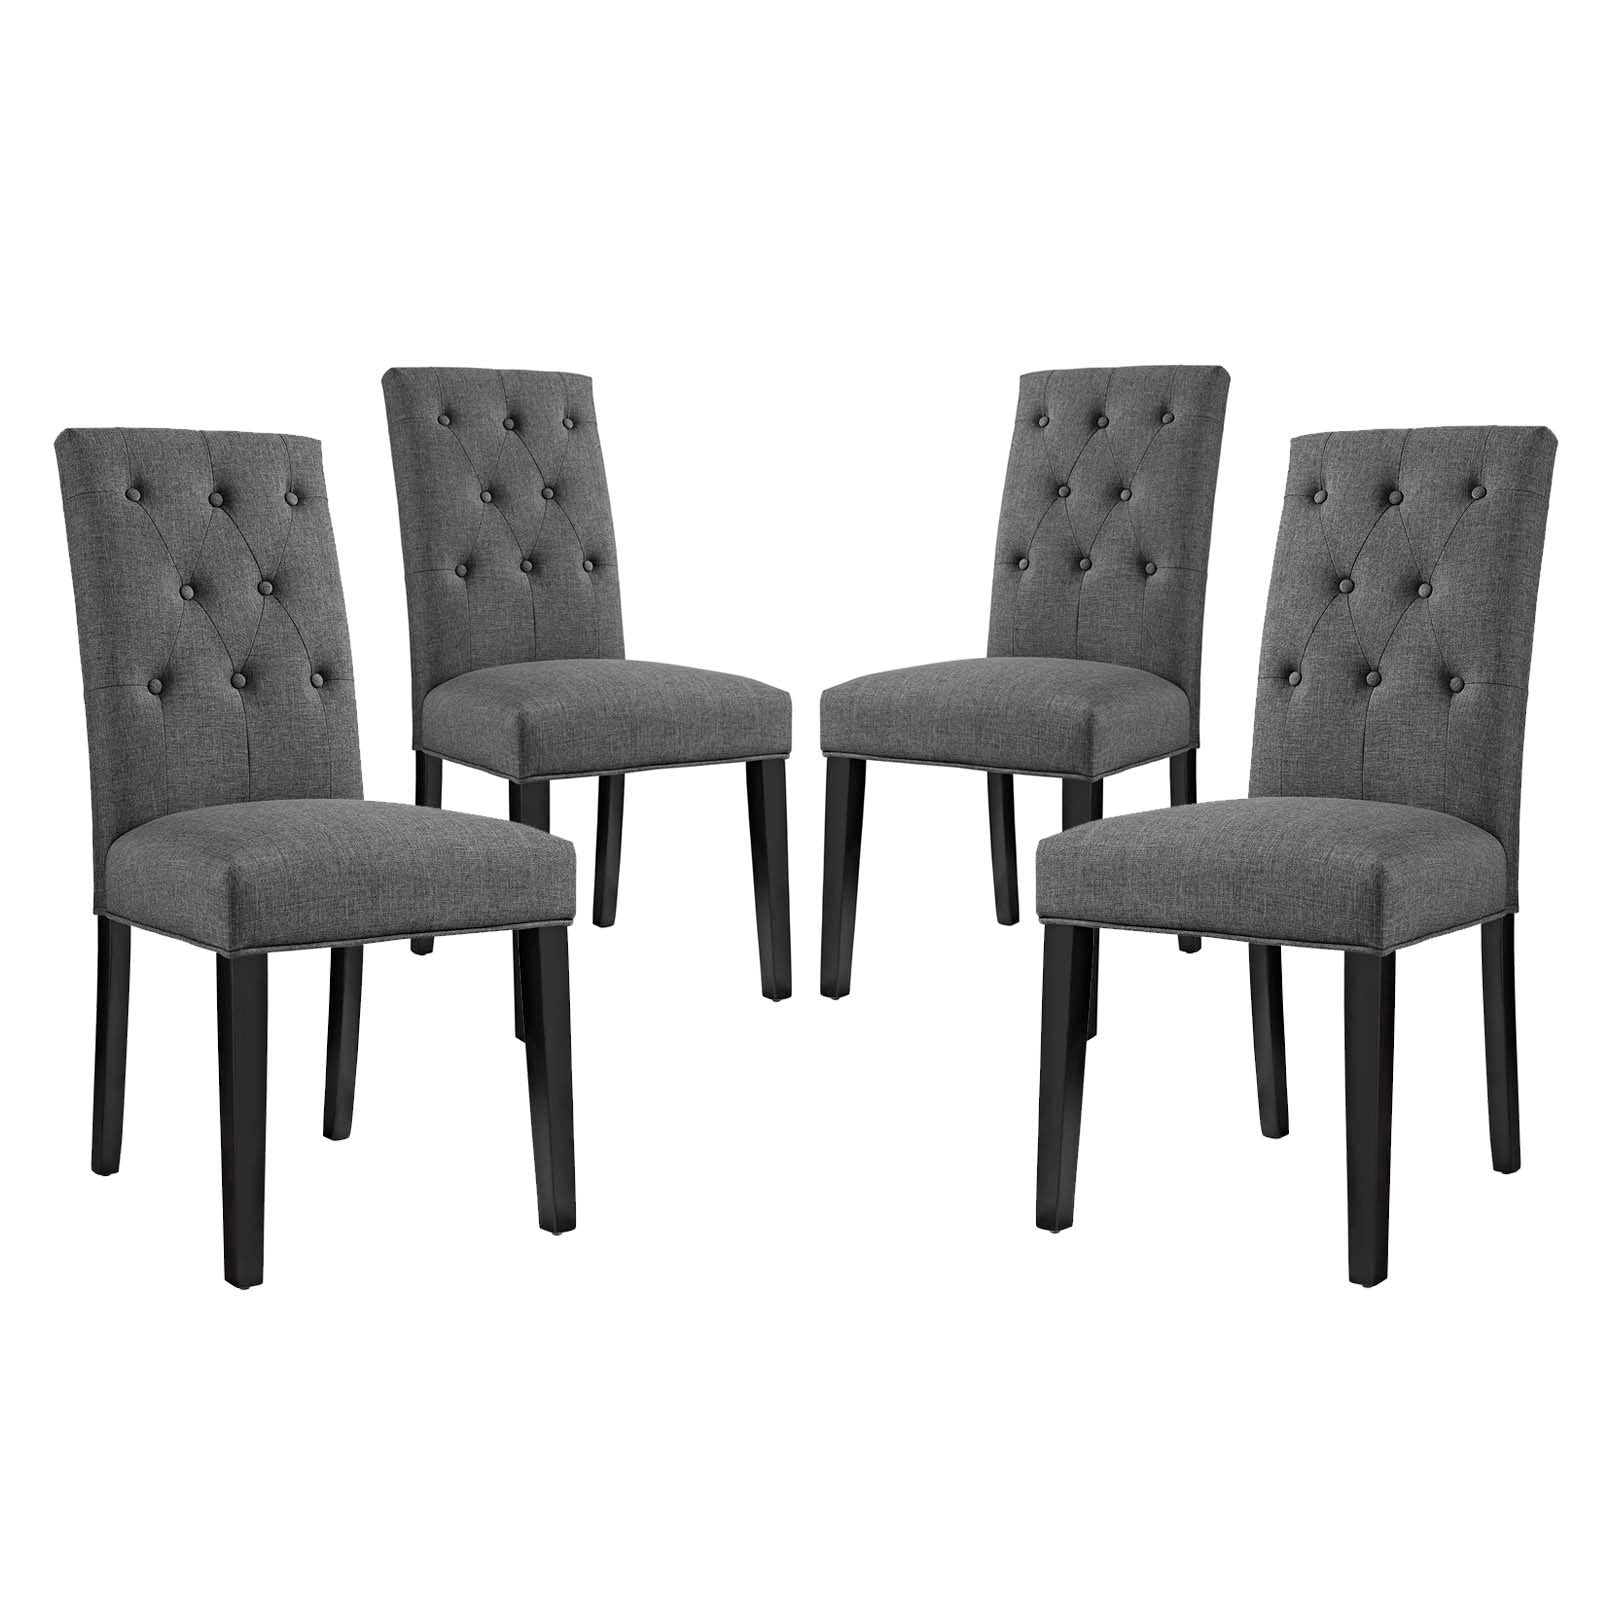 Modway Dining Chairs - Confer Dining Side Chair Fabric ( Set of 4 ) Gray